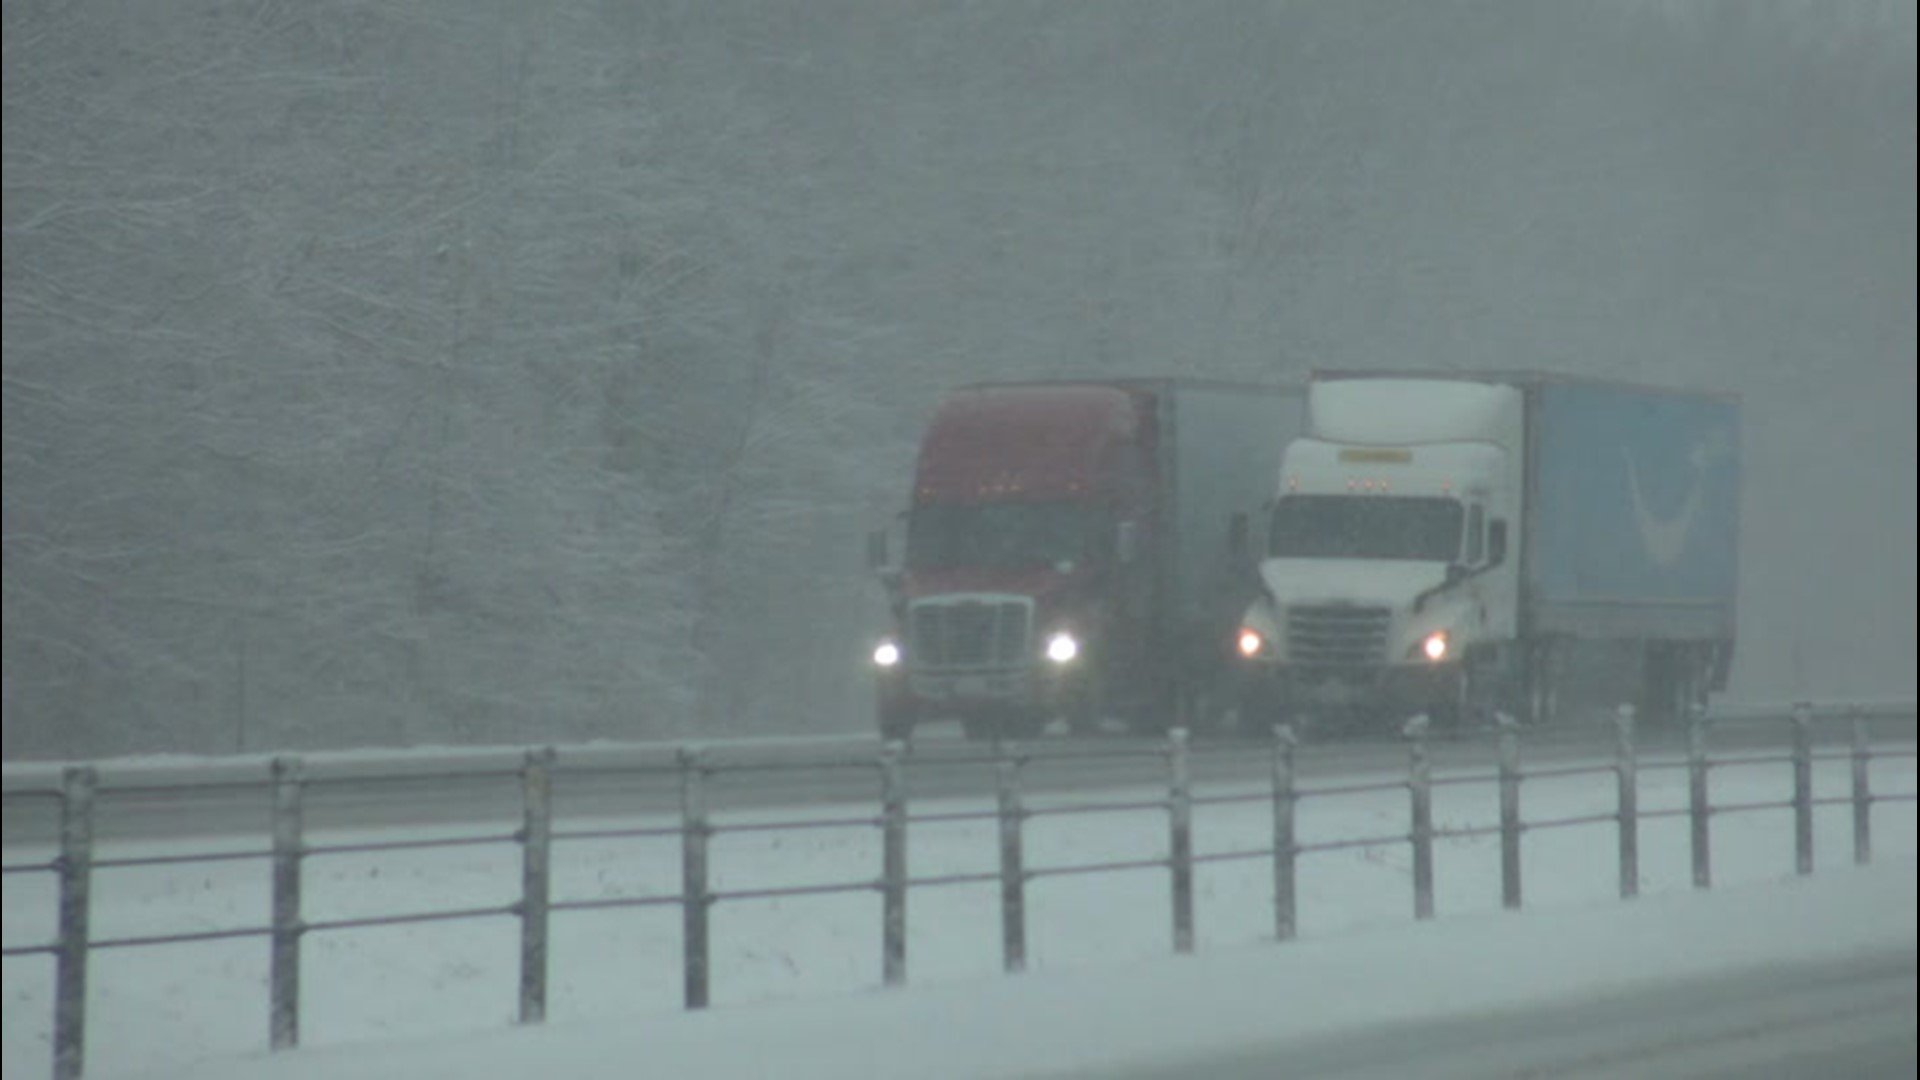 Moderate to heavy lake-effect snow battered southwest Michigan on Feb. 13, creating treacherous conditions for those traveling along Interstate 94.